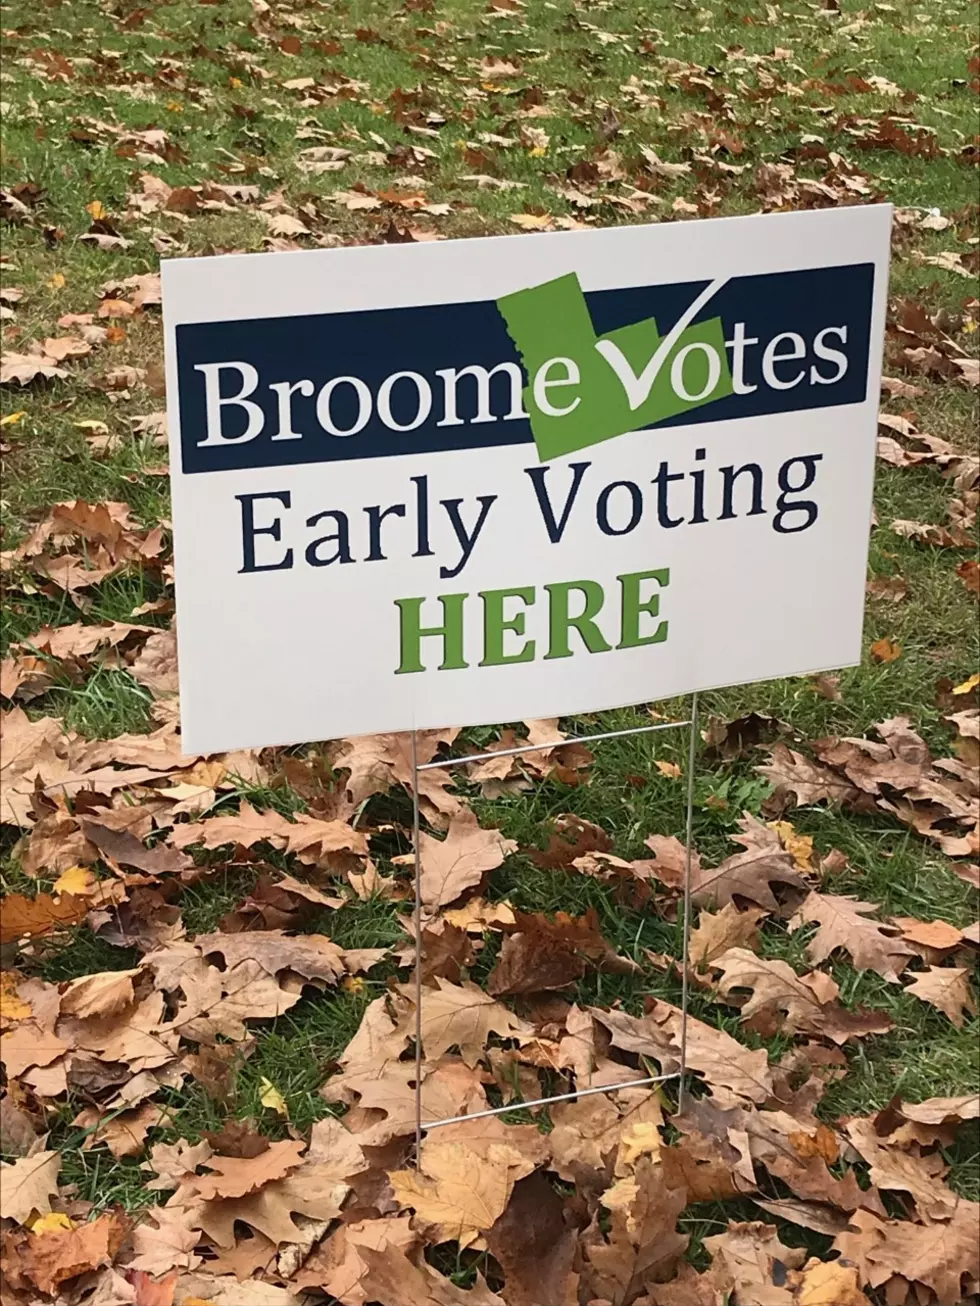 Early Voting Starts October 23 and Includes Propositions on Voting in NY